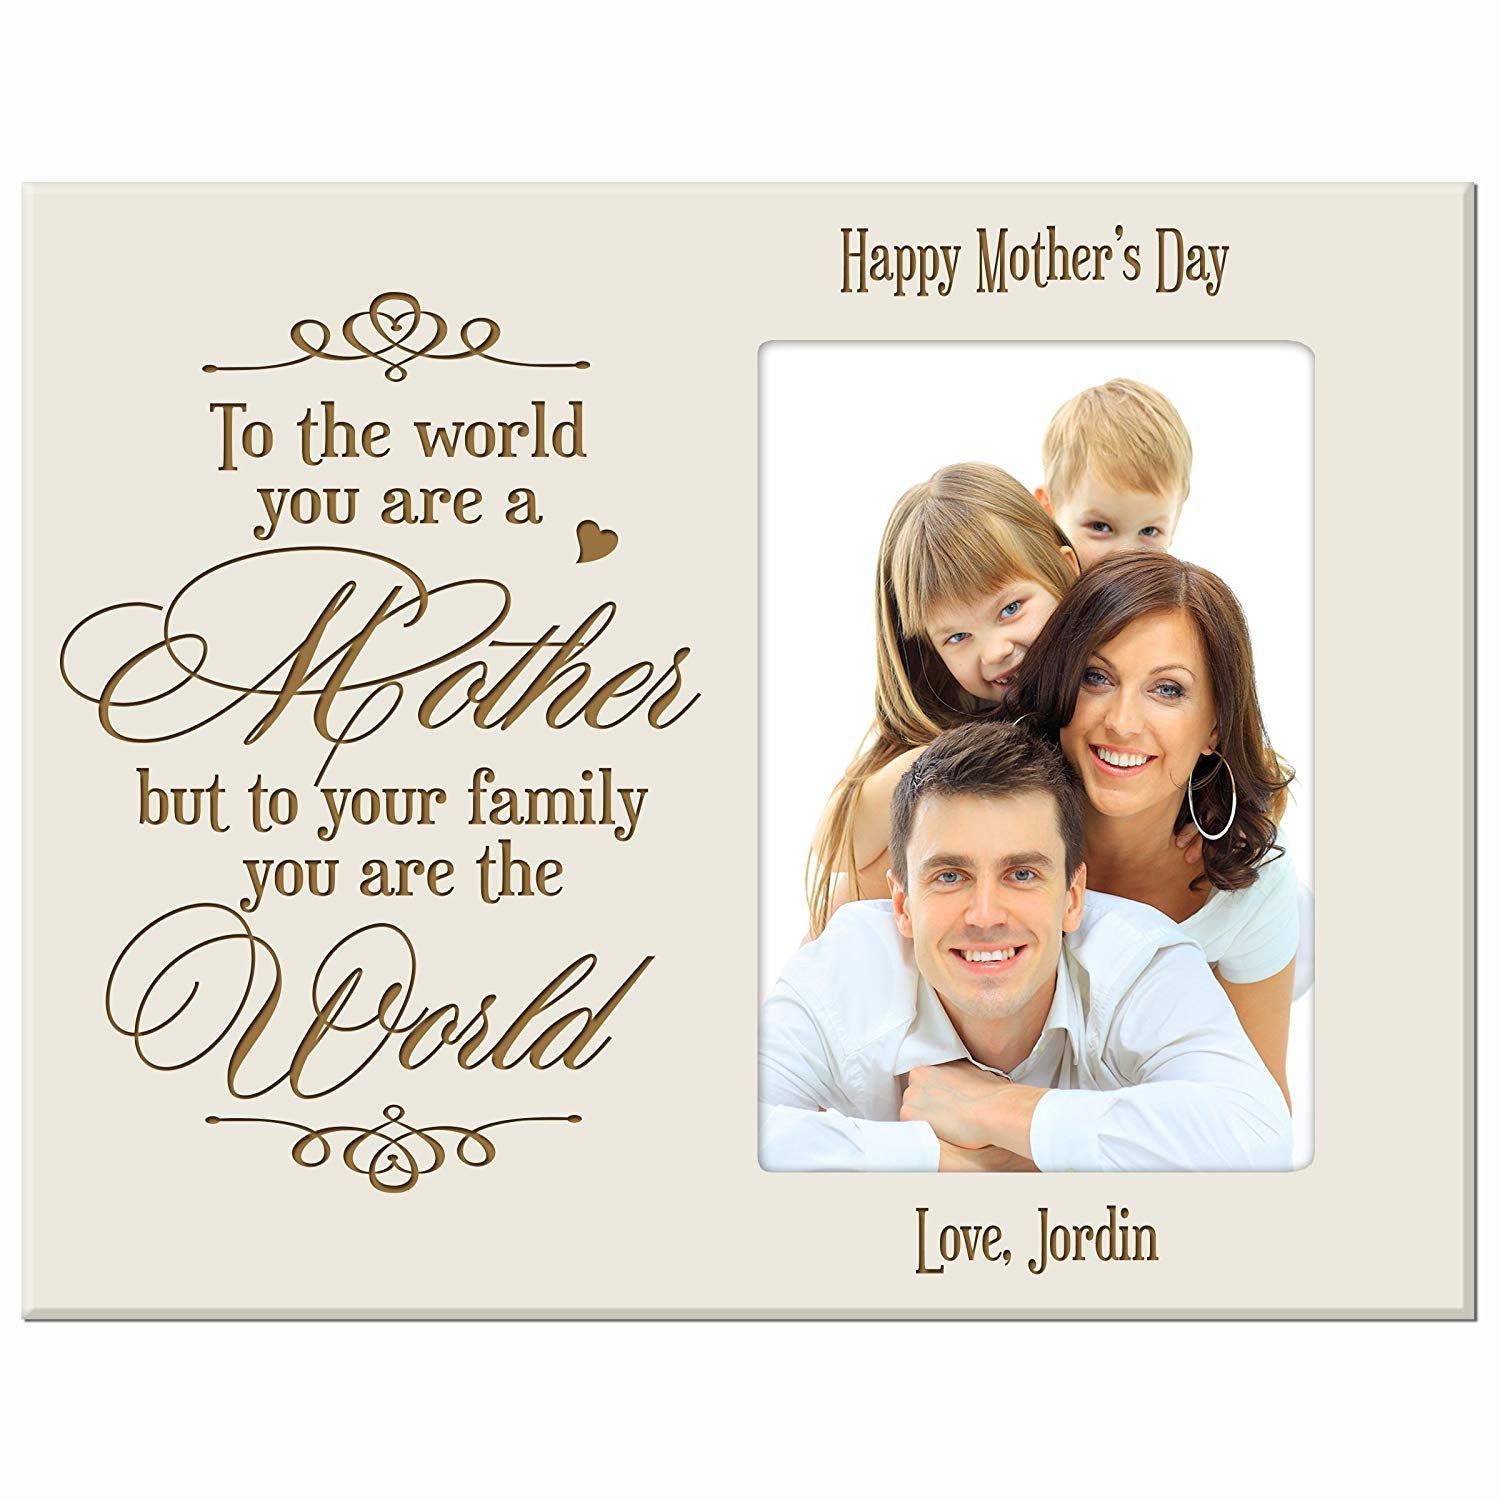 Personalized Happy Mother's Day Photo Frame - To The World